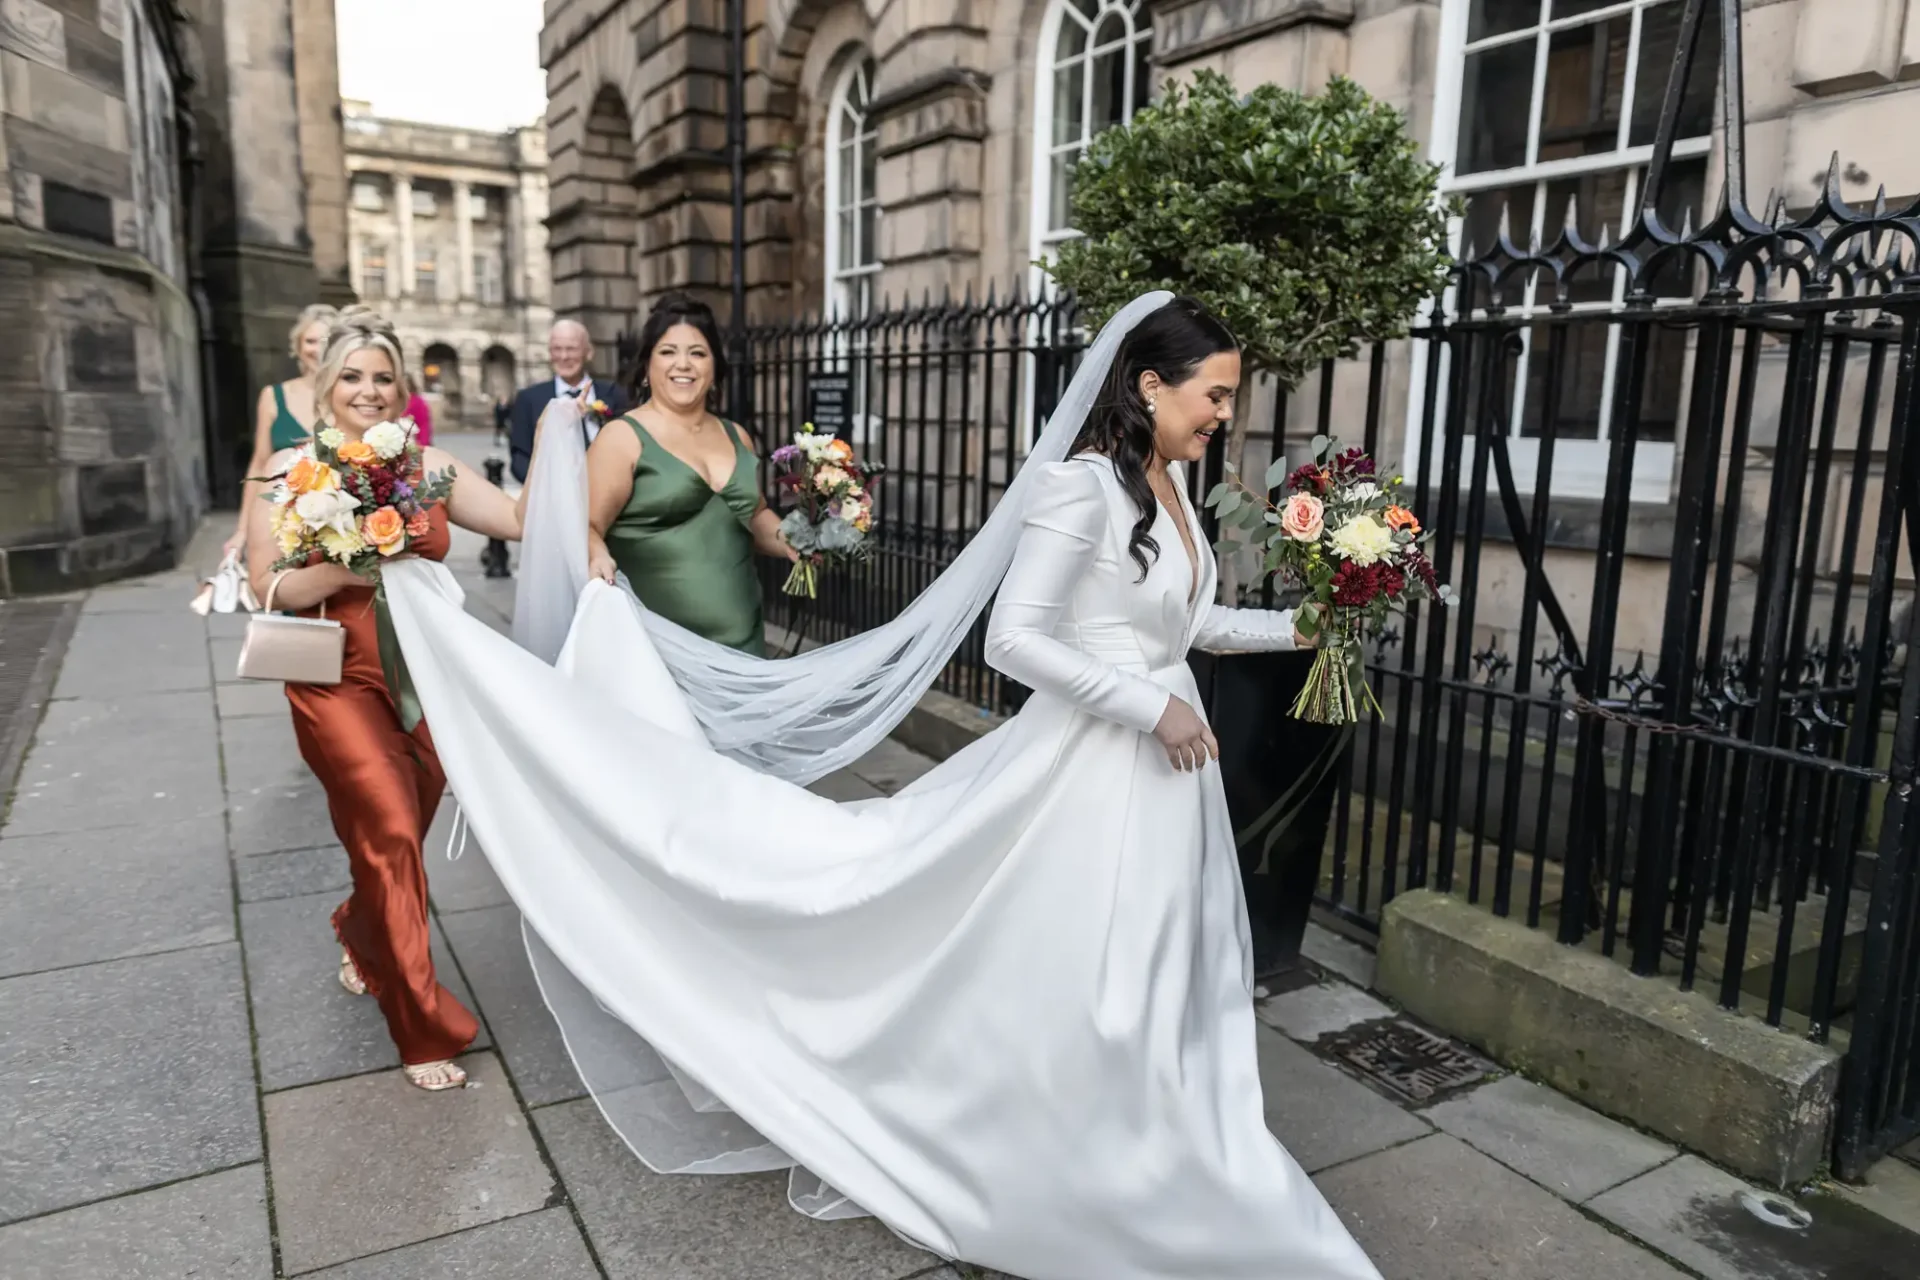 A bride in a flowing white gown walks with three bridesmaids holding colorful bouquets on a city street.